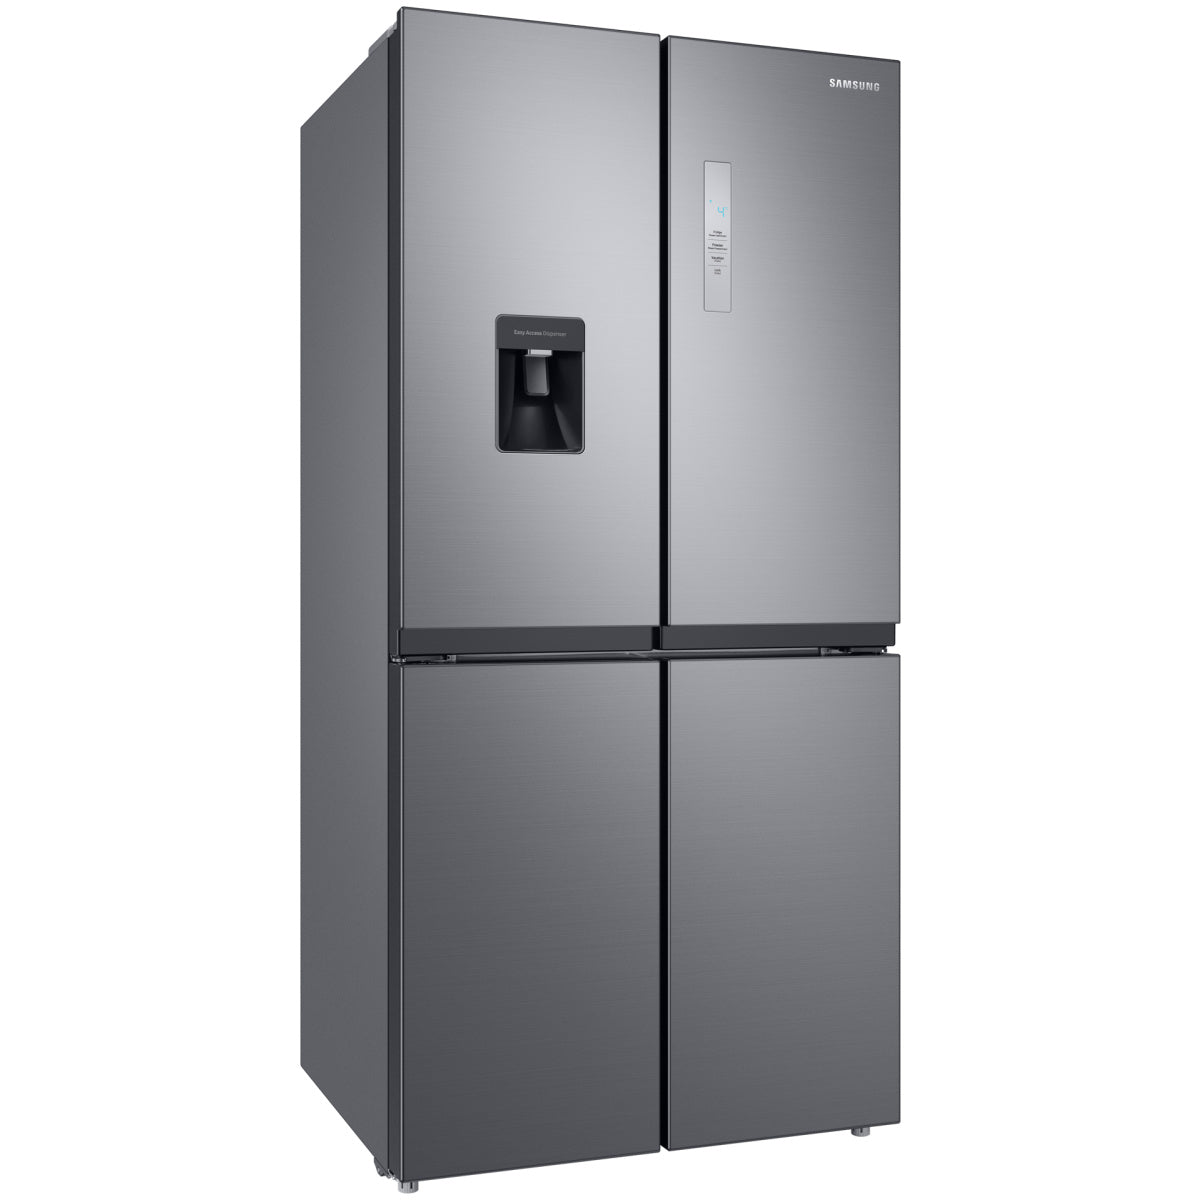 RF48A4010M9/LV/samsung REFRIGERATOR 4D 33'' French Door Refrigerator with water dispenser Moister, f YES / A++ / 480L